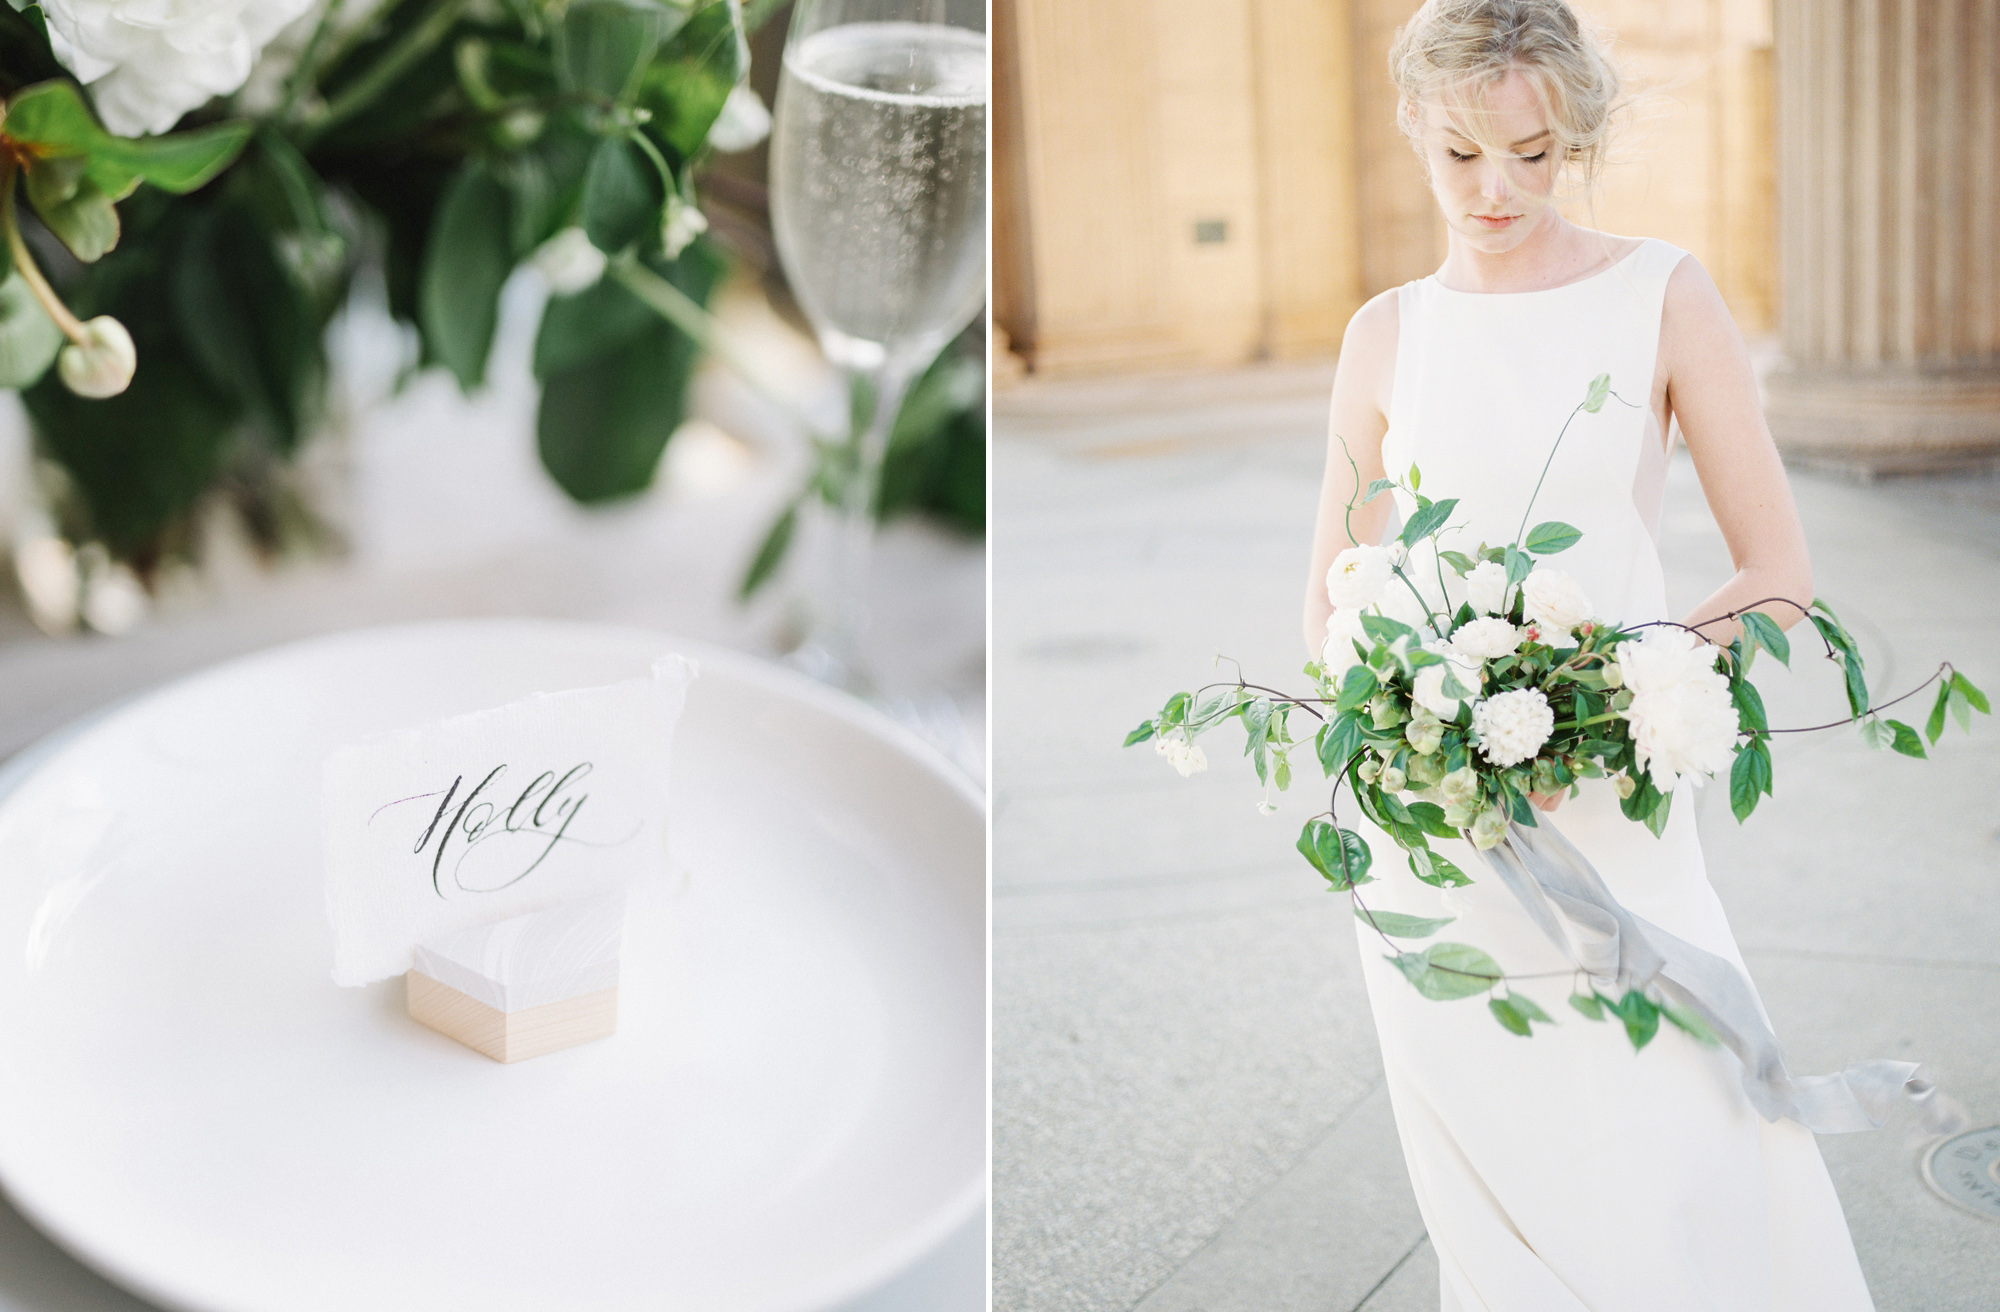 San Francisco wedding details and tablescable photographed by Santa Barbara wedding photographer Tenth & Grace.